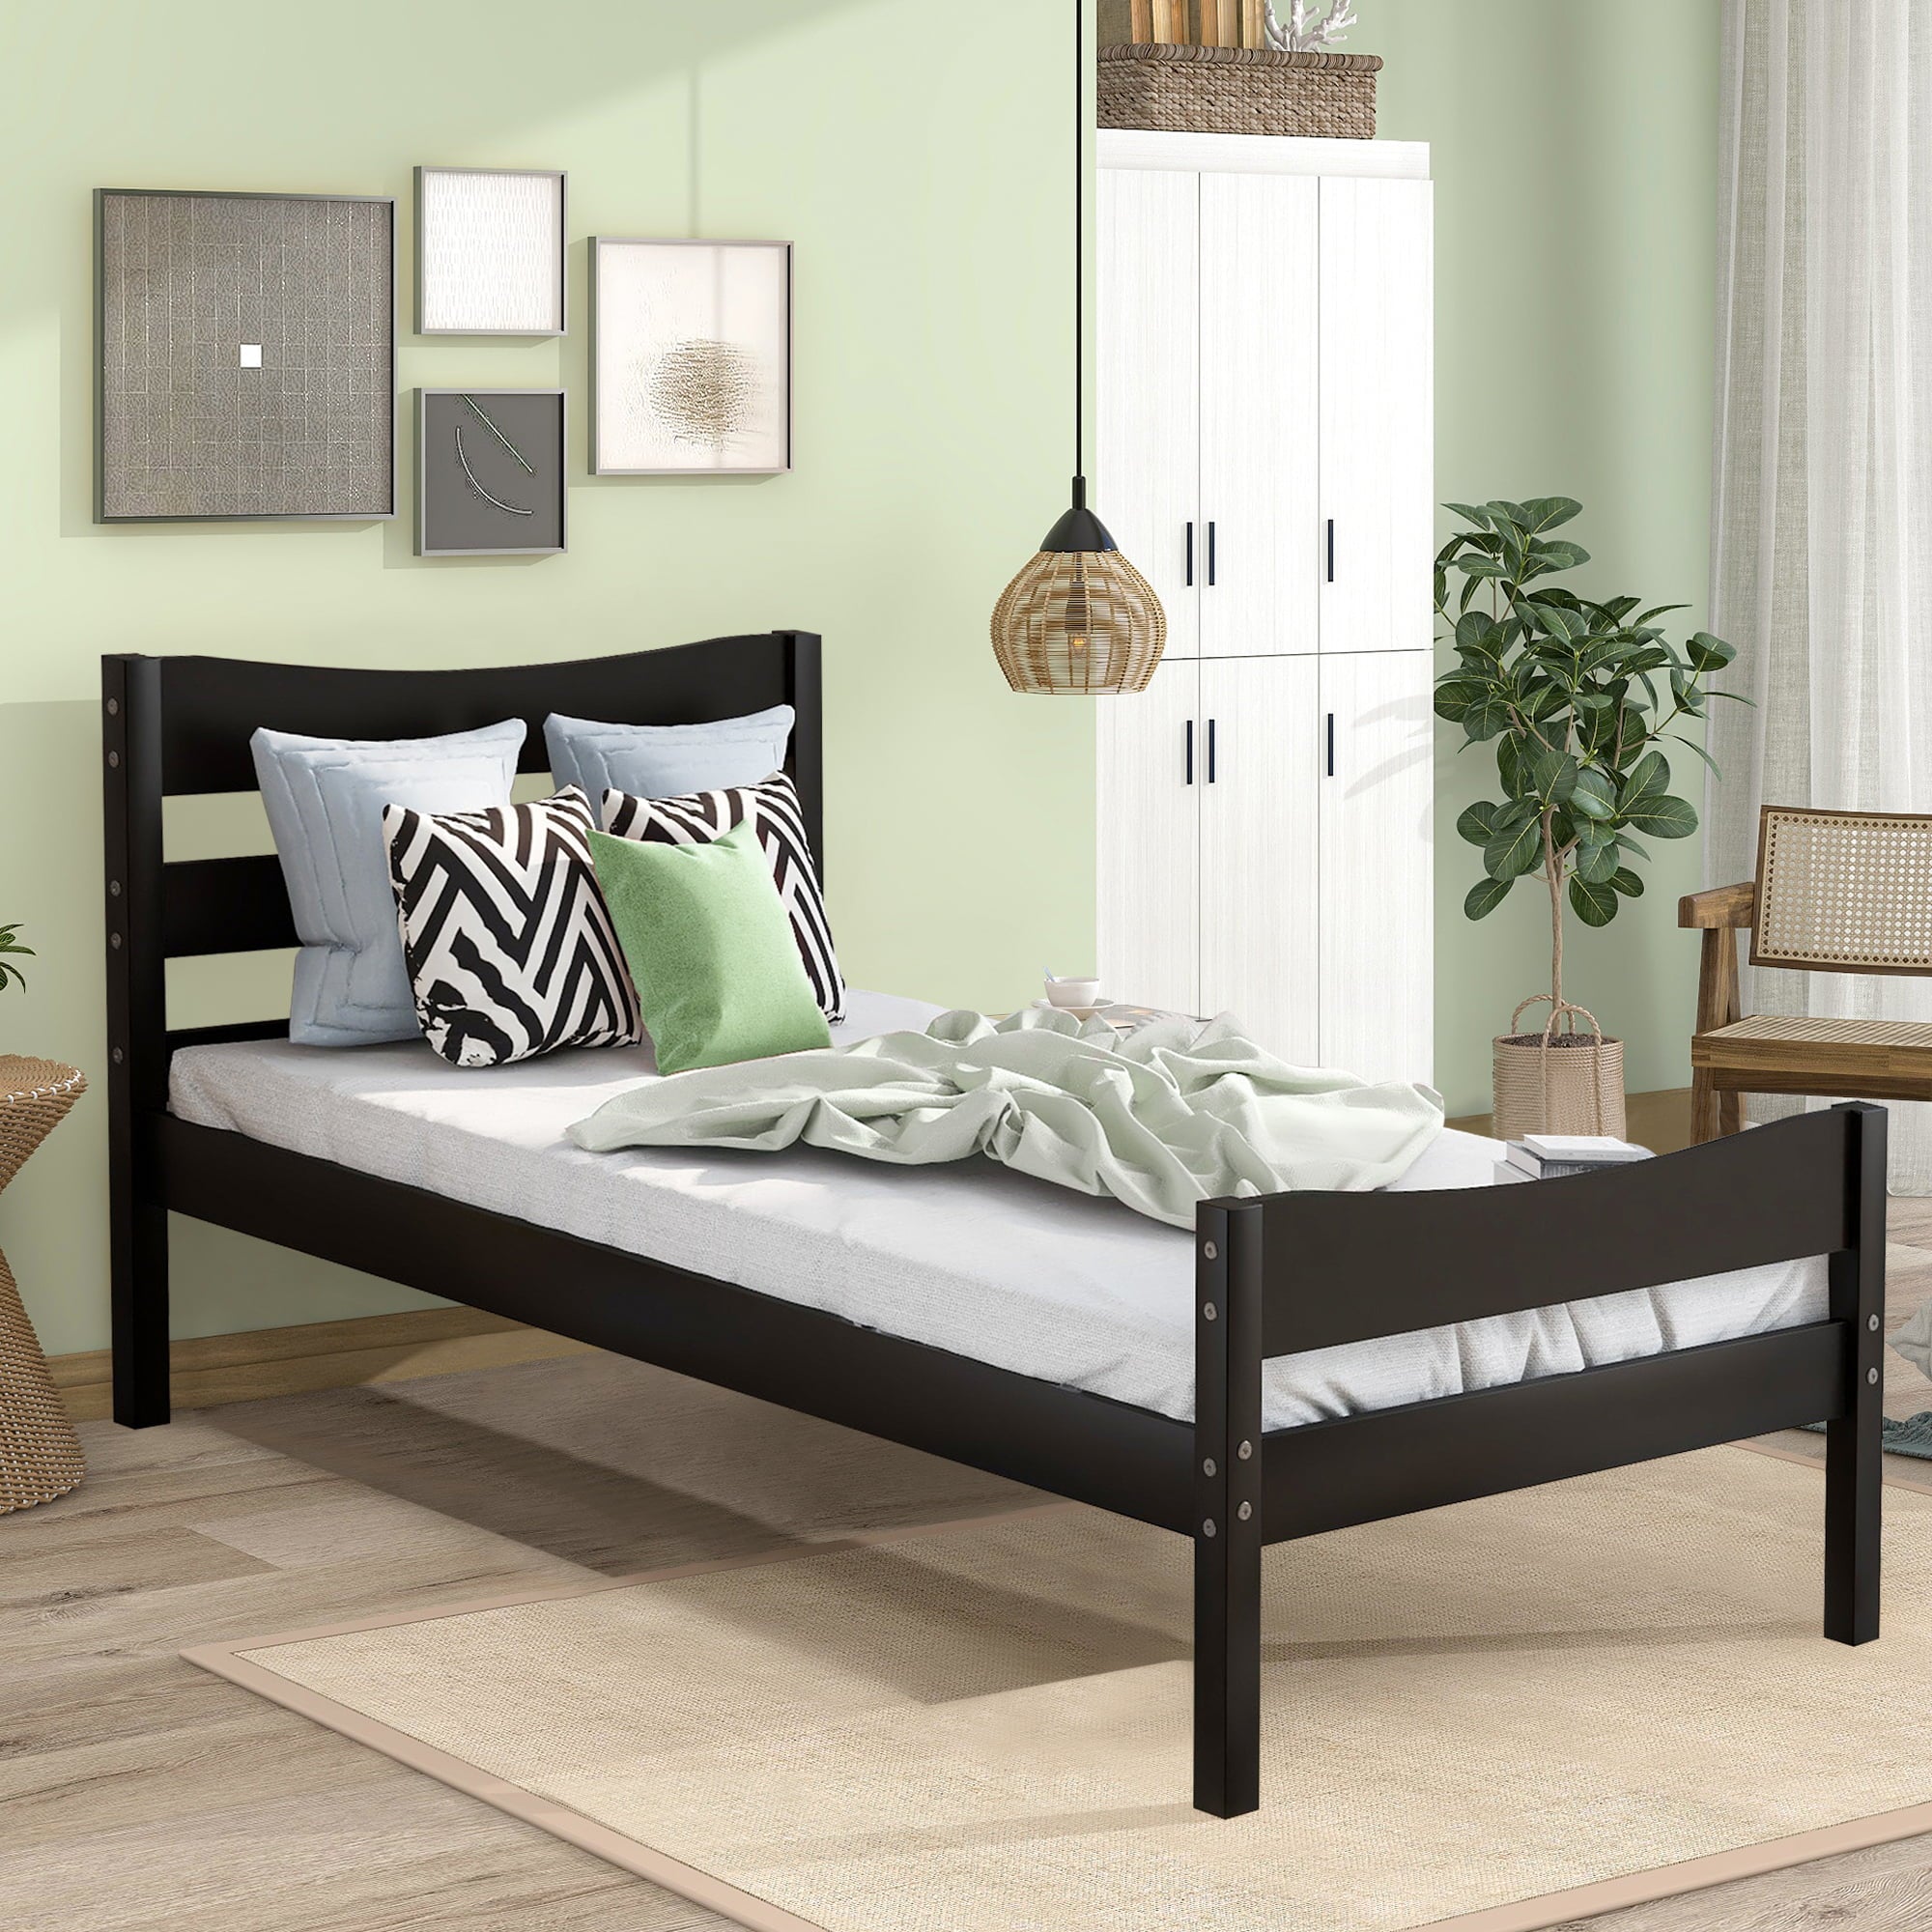 BTMWAY Wood Twin Bed Frame for Kids Adults, Solid Wood Platform Bed Frame with Headboard and Footboard, Modern Twin Size Bed Frame with Wooden Slats Support, No Box Spring Needed, Espresso